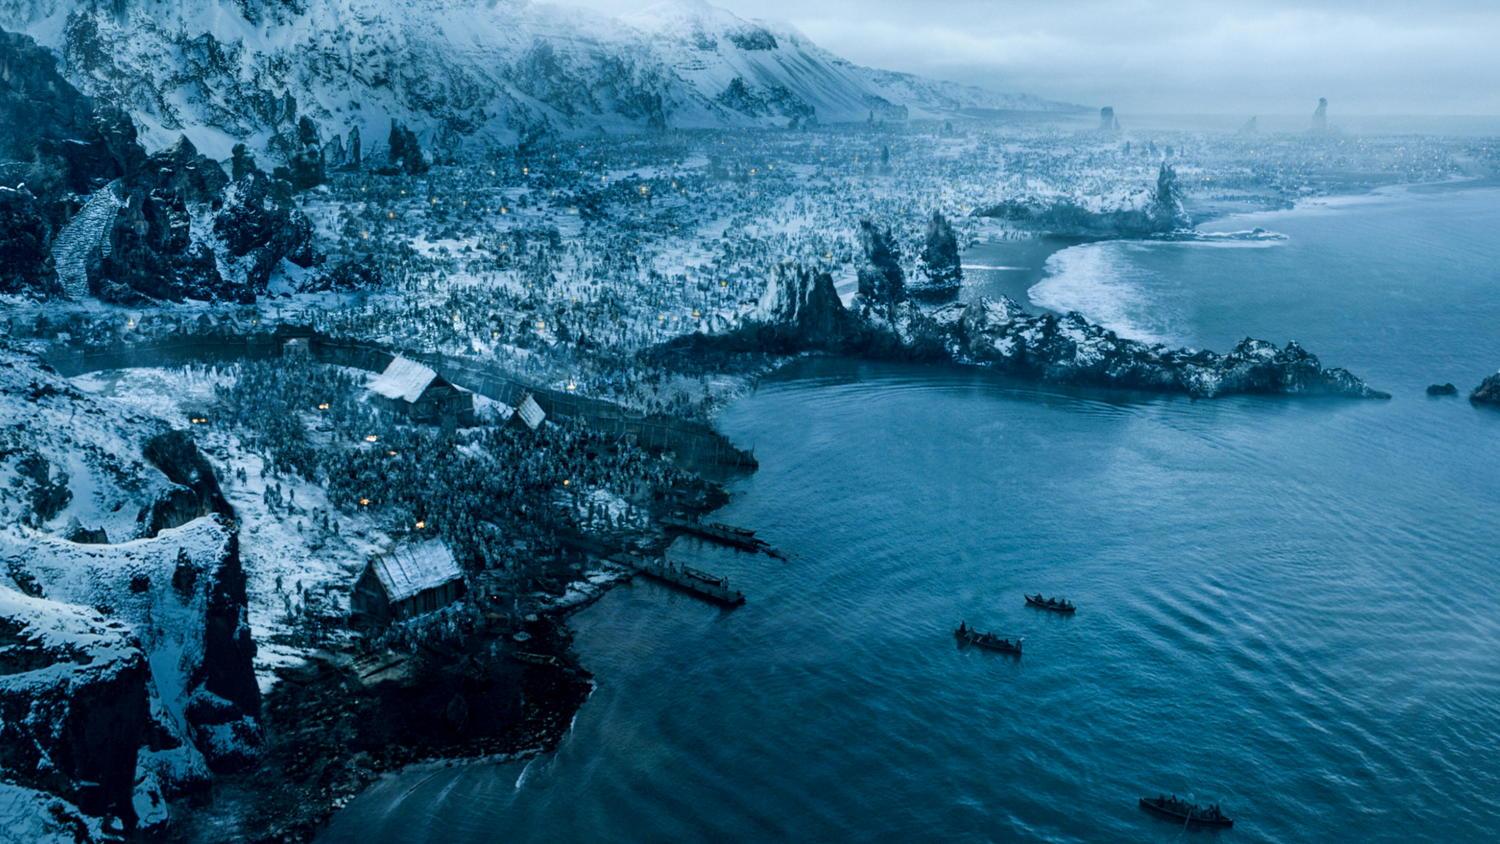 Game Of Thrones Season 5 Episode 8 Hardhome Recap Watchers On The Wall A Game Of Thrones